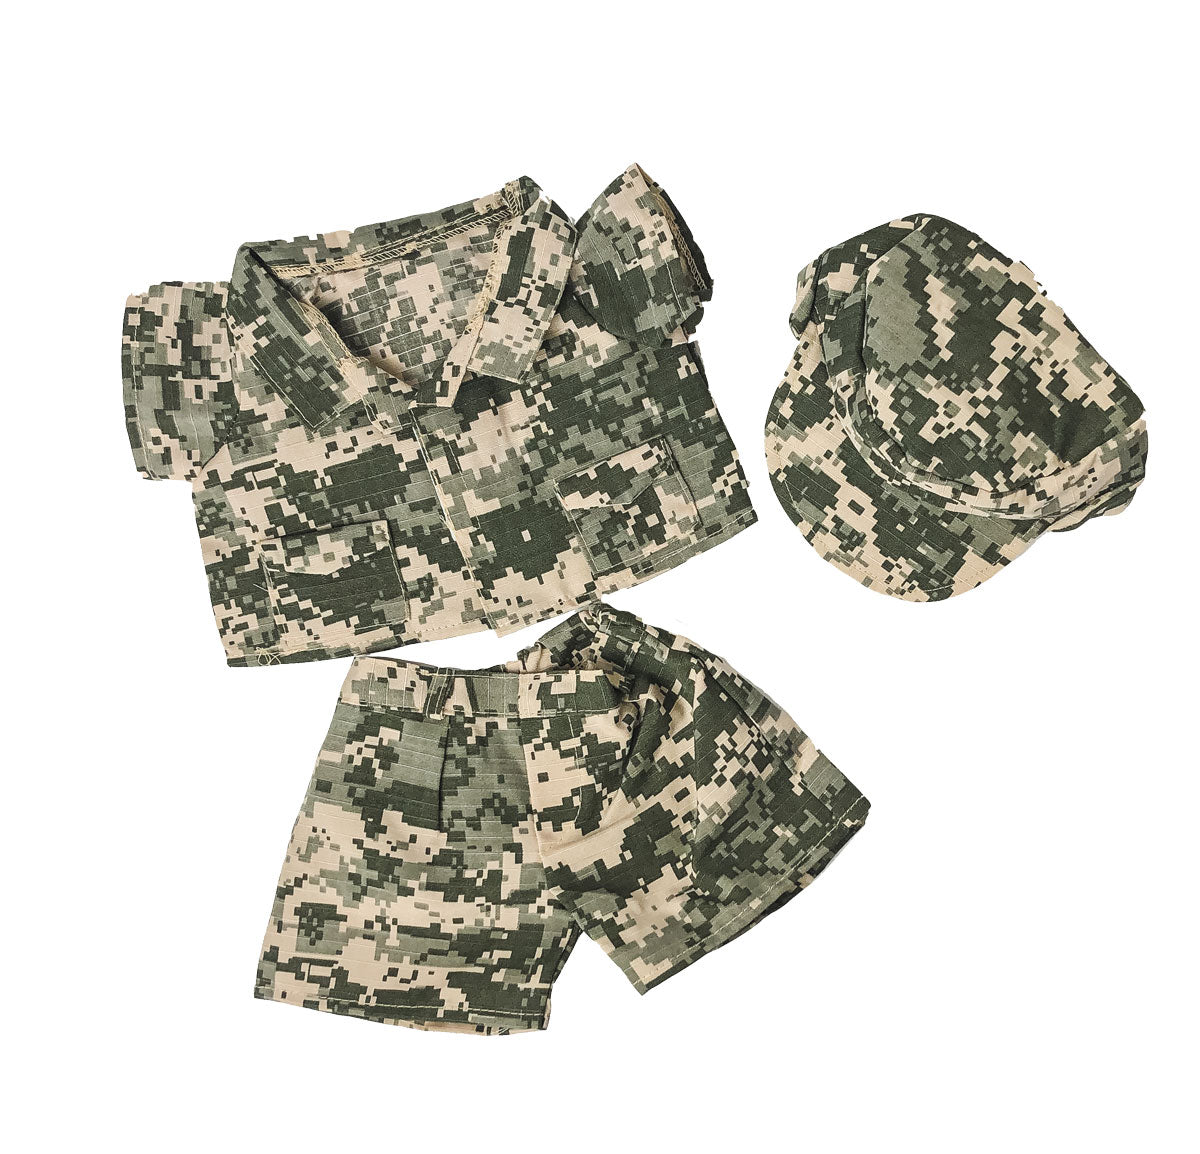 Army Digital Camouflage Outfit